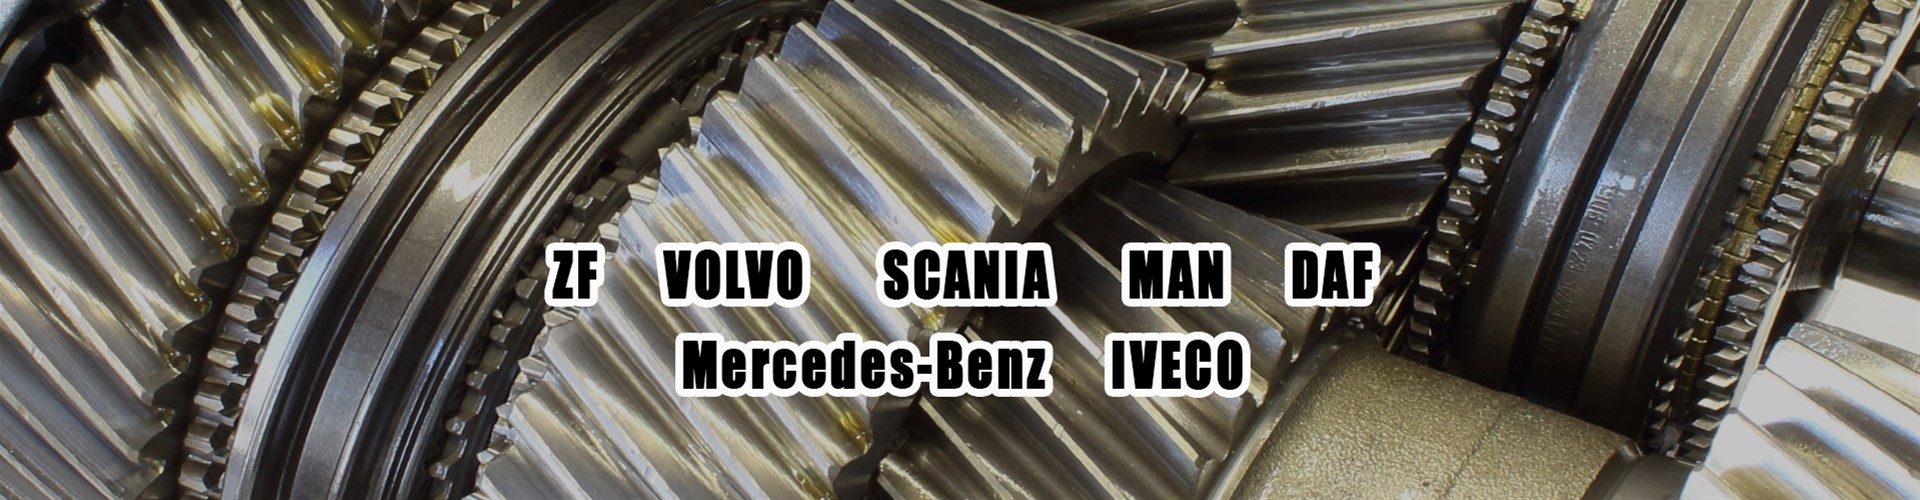 Gaiserlidis Spare Parts for ZF | MERCEDES | VOLVO | SCANIA | MAN | DAF | IVECO